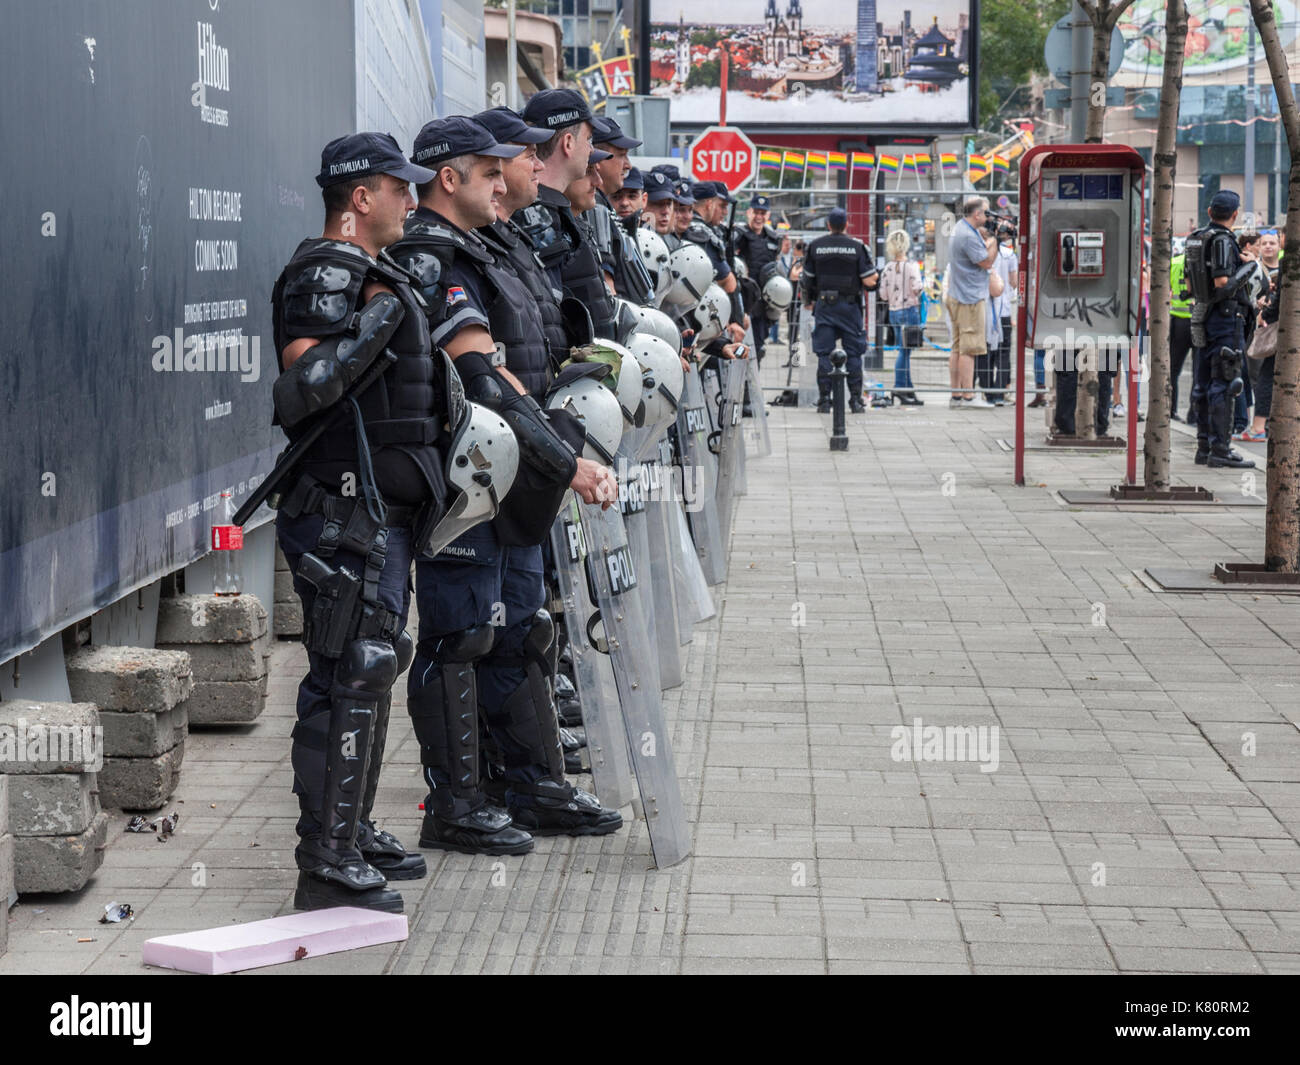 BELGRADE, SERBIA - SEPTEMBER 17, 2017: Serbian policemen protecting the 2017 edition of the Belgrade gay pride. The parade happened this year without trouble, under huge police watch.   Picture of the 2017 edition of the belgrade gay pride in Serbia. The pride was held on the 17th of September, it was the third consecutive edition without clashes, after several years of prohibition, and other years where huge fights opposed demonstrators, policemen and anti-homosexual activists Stock Photo